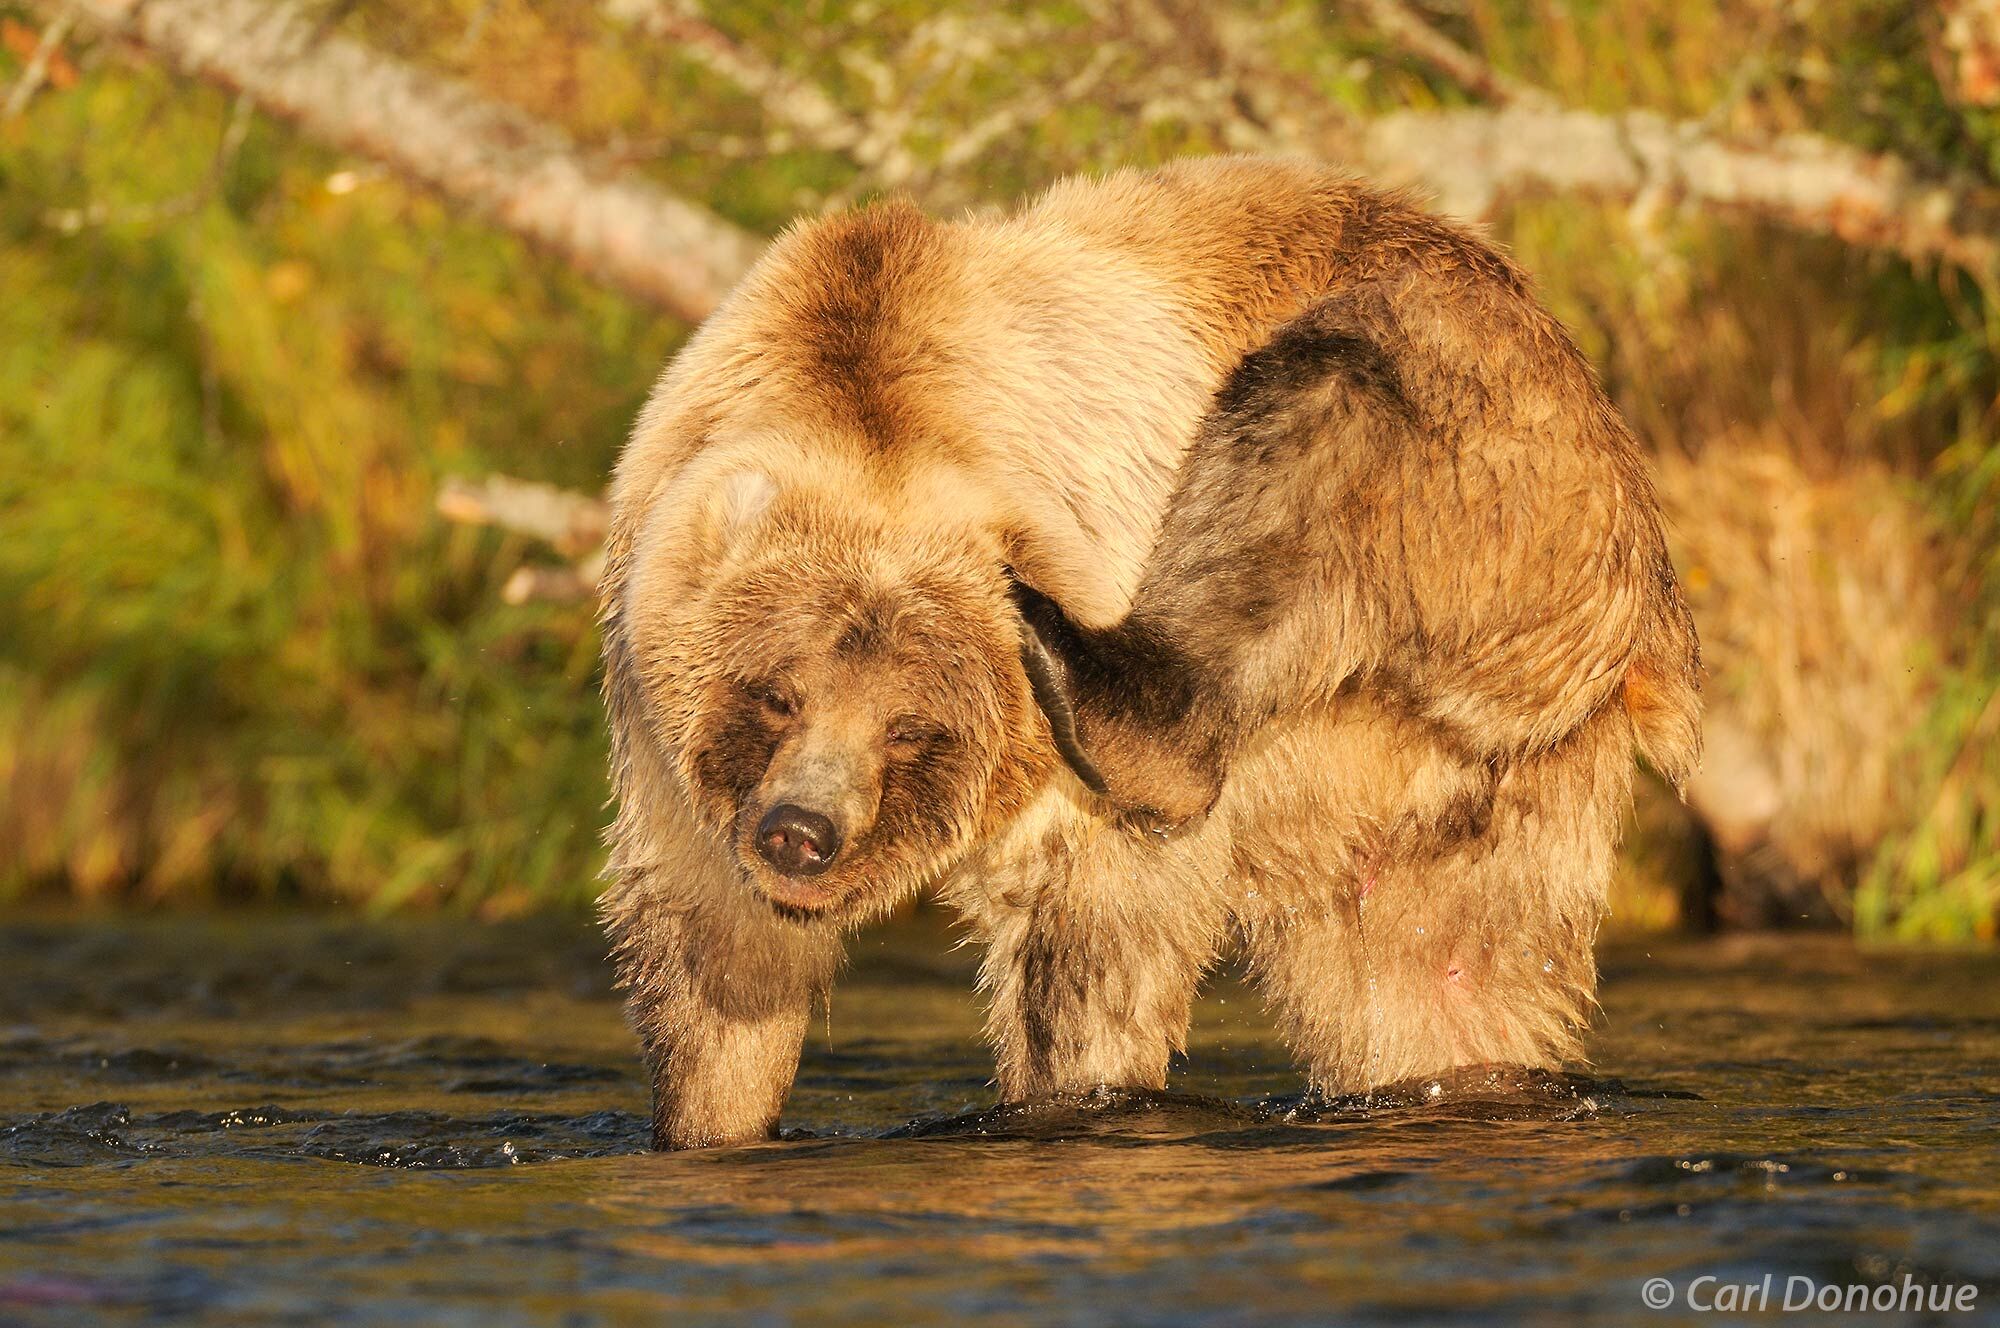 A blond grizzly bear standing in a river reaches behind his ear to scratch with his hind foot claws.  Grizzlies, or brown bears...